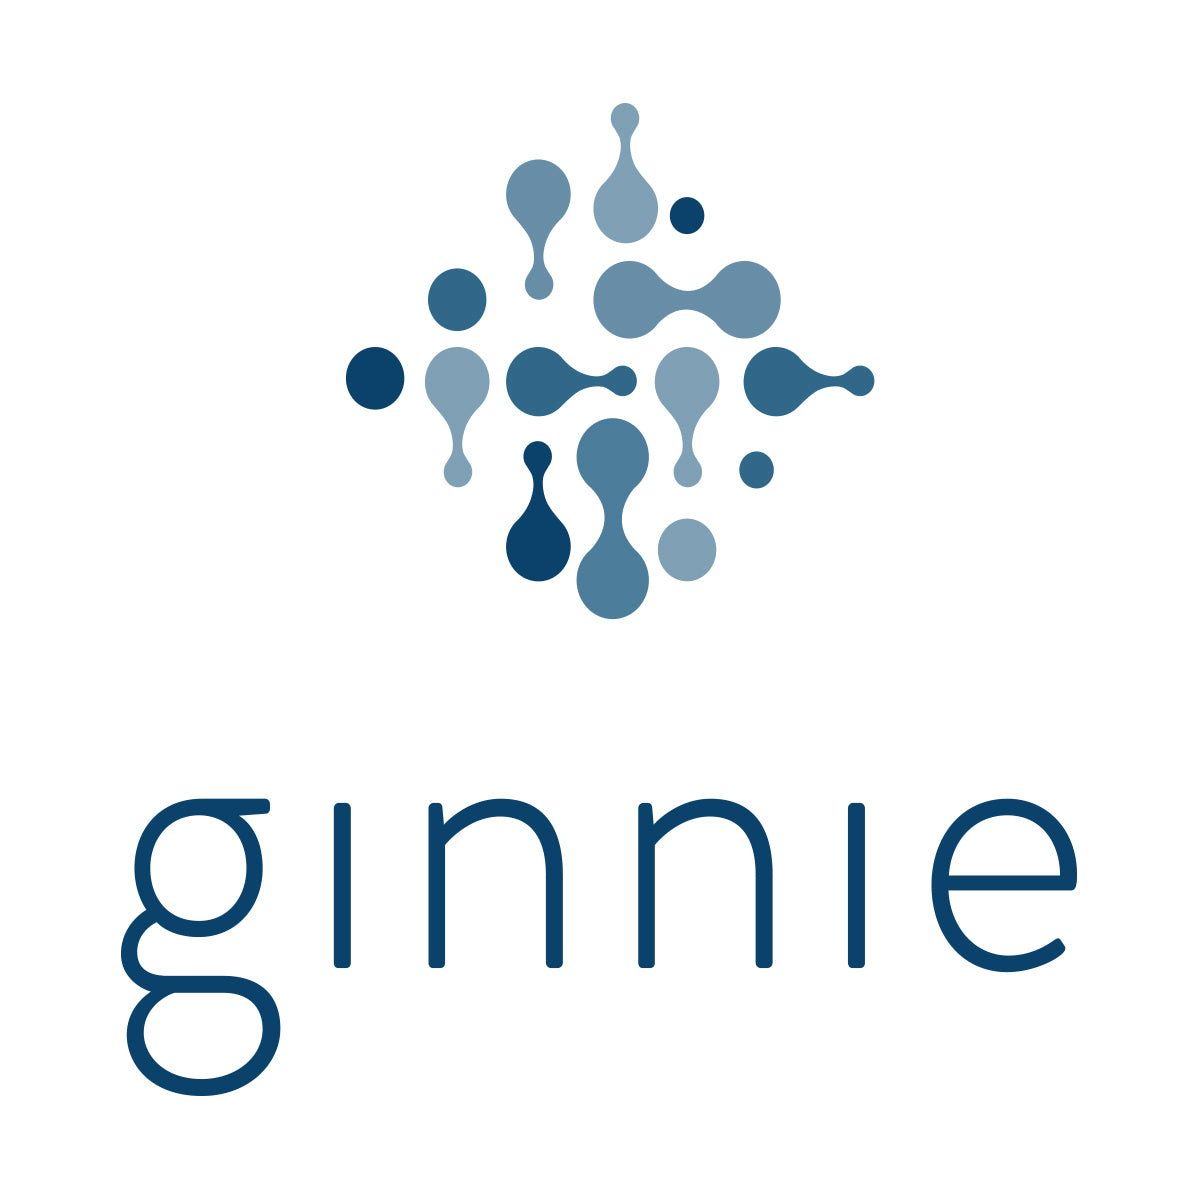 Hire Shopify Experts to integrate ginnie app into a Shopify store